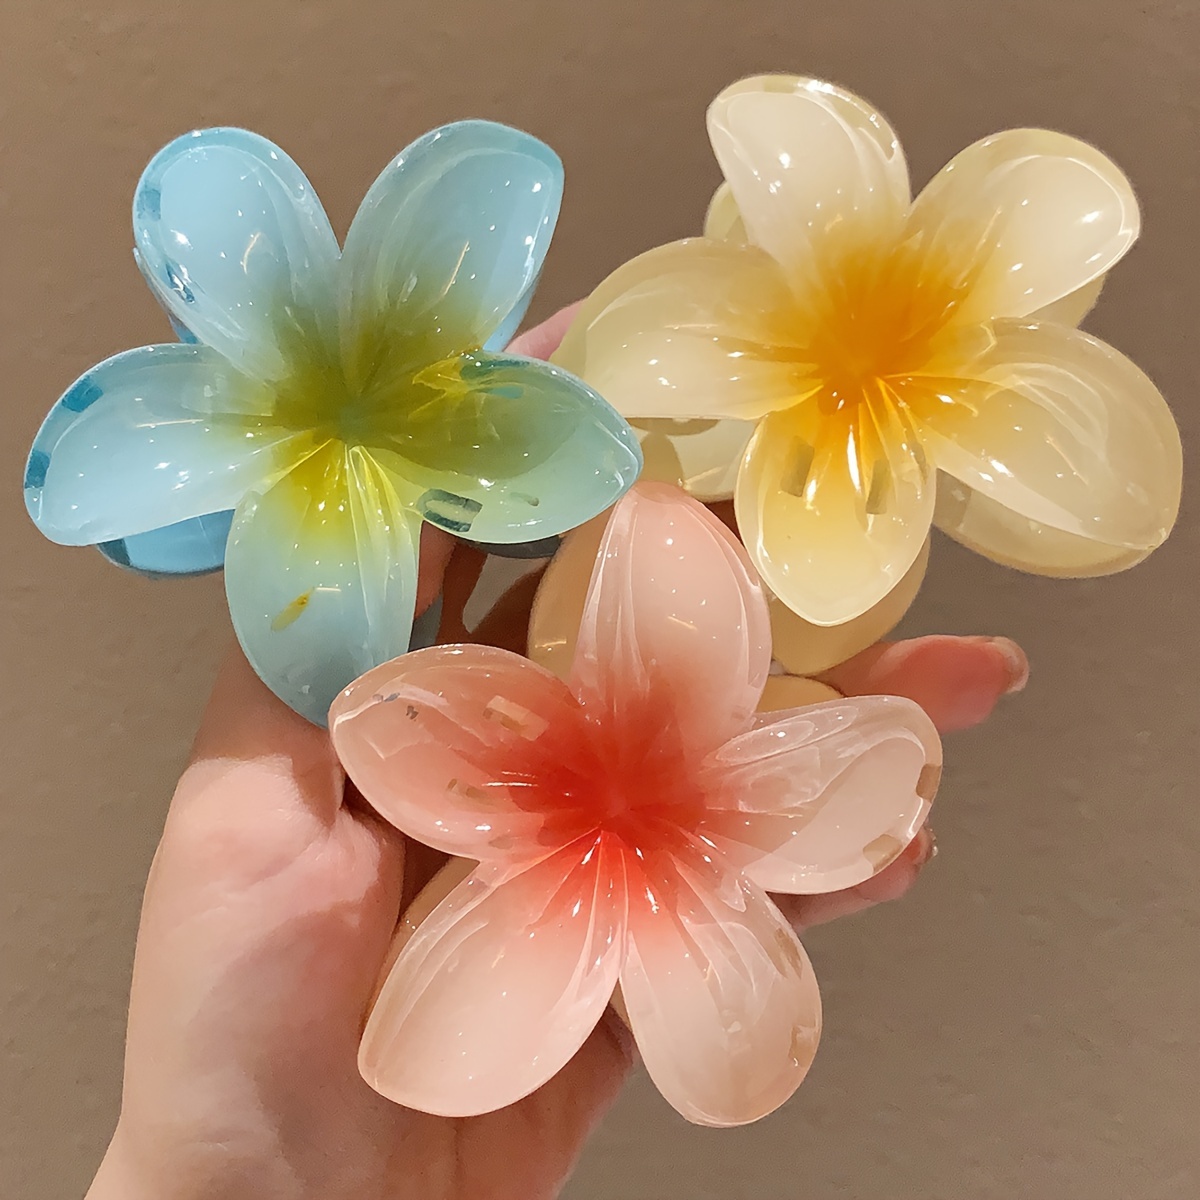 

Elegant Plumeria Hair Clip Set - Cute And Sweet Flowers Design, Plastic Material, Suitable For Ages 14 And Up, Medium Size, Perfect For Everyday Wear